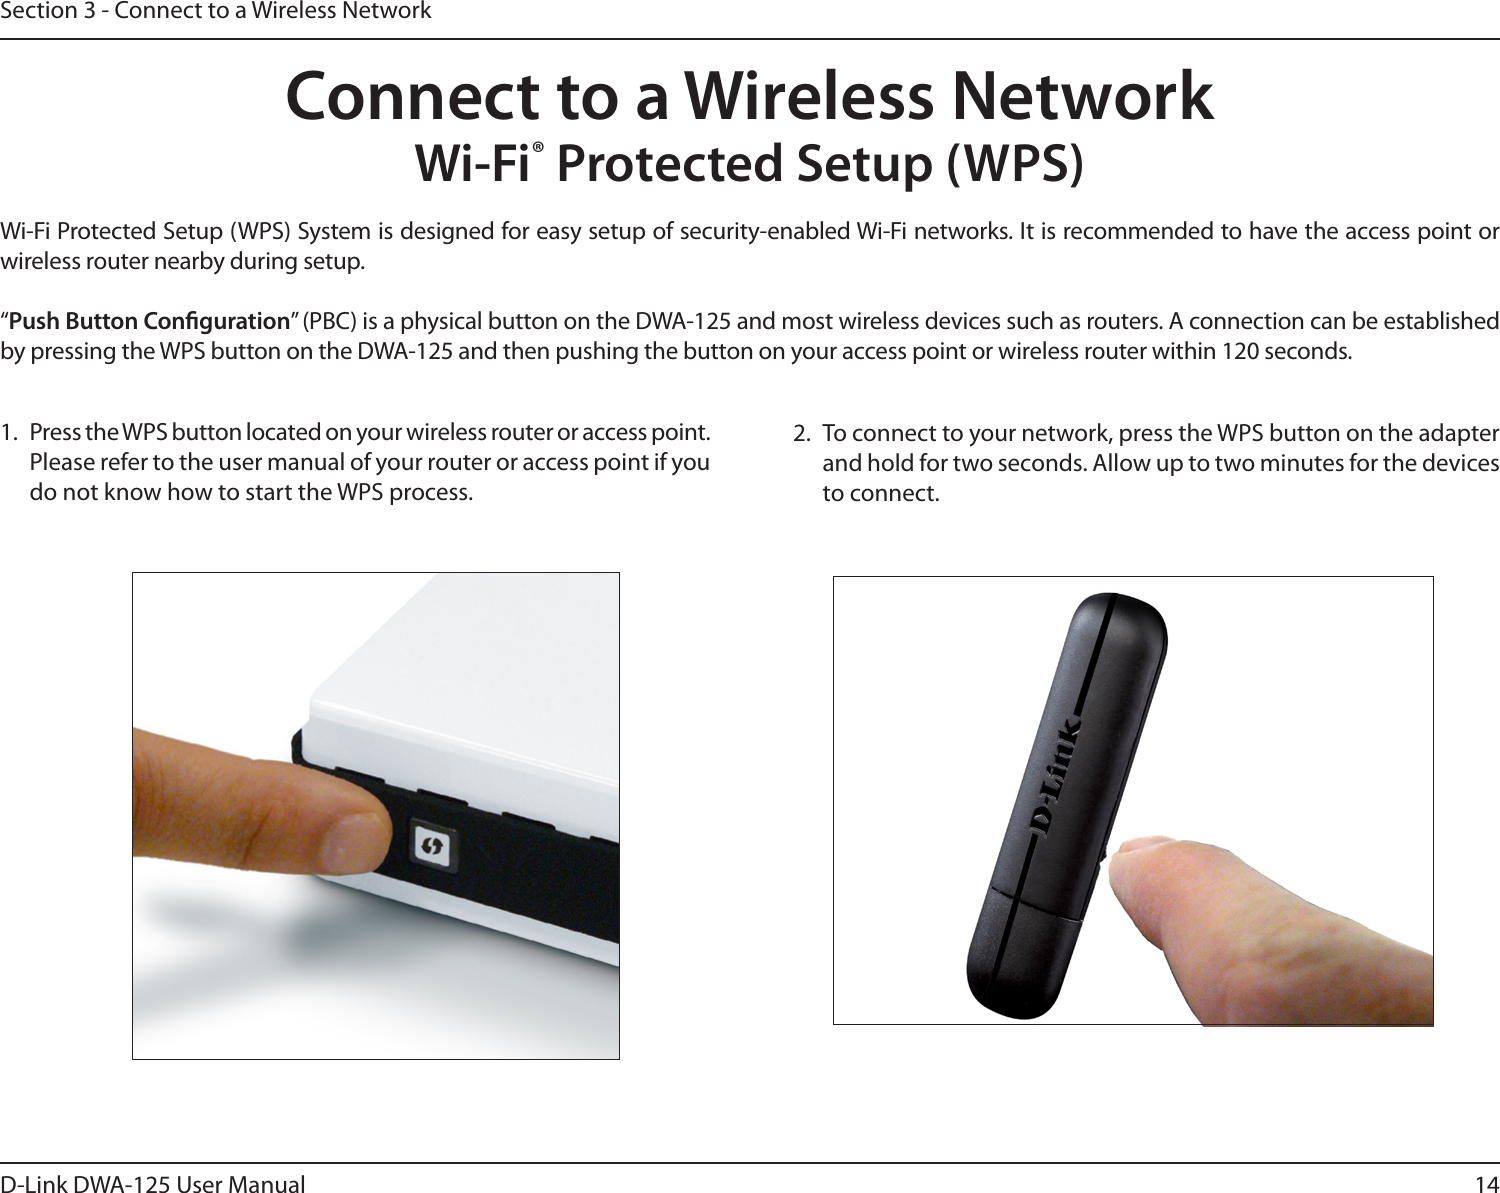 14D-Link DWA-125 User ManualSection 3 - Connect to a Wireless NetworkWi-Fi® Protected Setup (WPS)Wi-Fi Protected Setup (WPS) System is designed for easy setup of security-enabled Wi-Fi networks. It is recommended to have the access point or wireless router nearby during setup. “Push Button Conguration” (PBC) is a physical button on the DWA-125 and most wireless devices such as routers. A connection can be established by pressing the WPS button on the DWA-125 and then pushing the button on your access point or wireless router within 120 seconds. Connect to a Wireless Network2.  To connect to your network, press the WPS button on the adapter and hold for two seconds. Allow up to two minutes for the devices to connect.1.  Press the WPS button located on your wireless router or access point. Please refer to the user manual of your router or access point if you do not know how to start the WPS process.